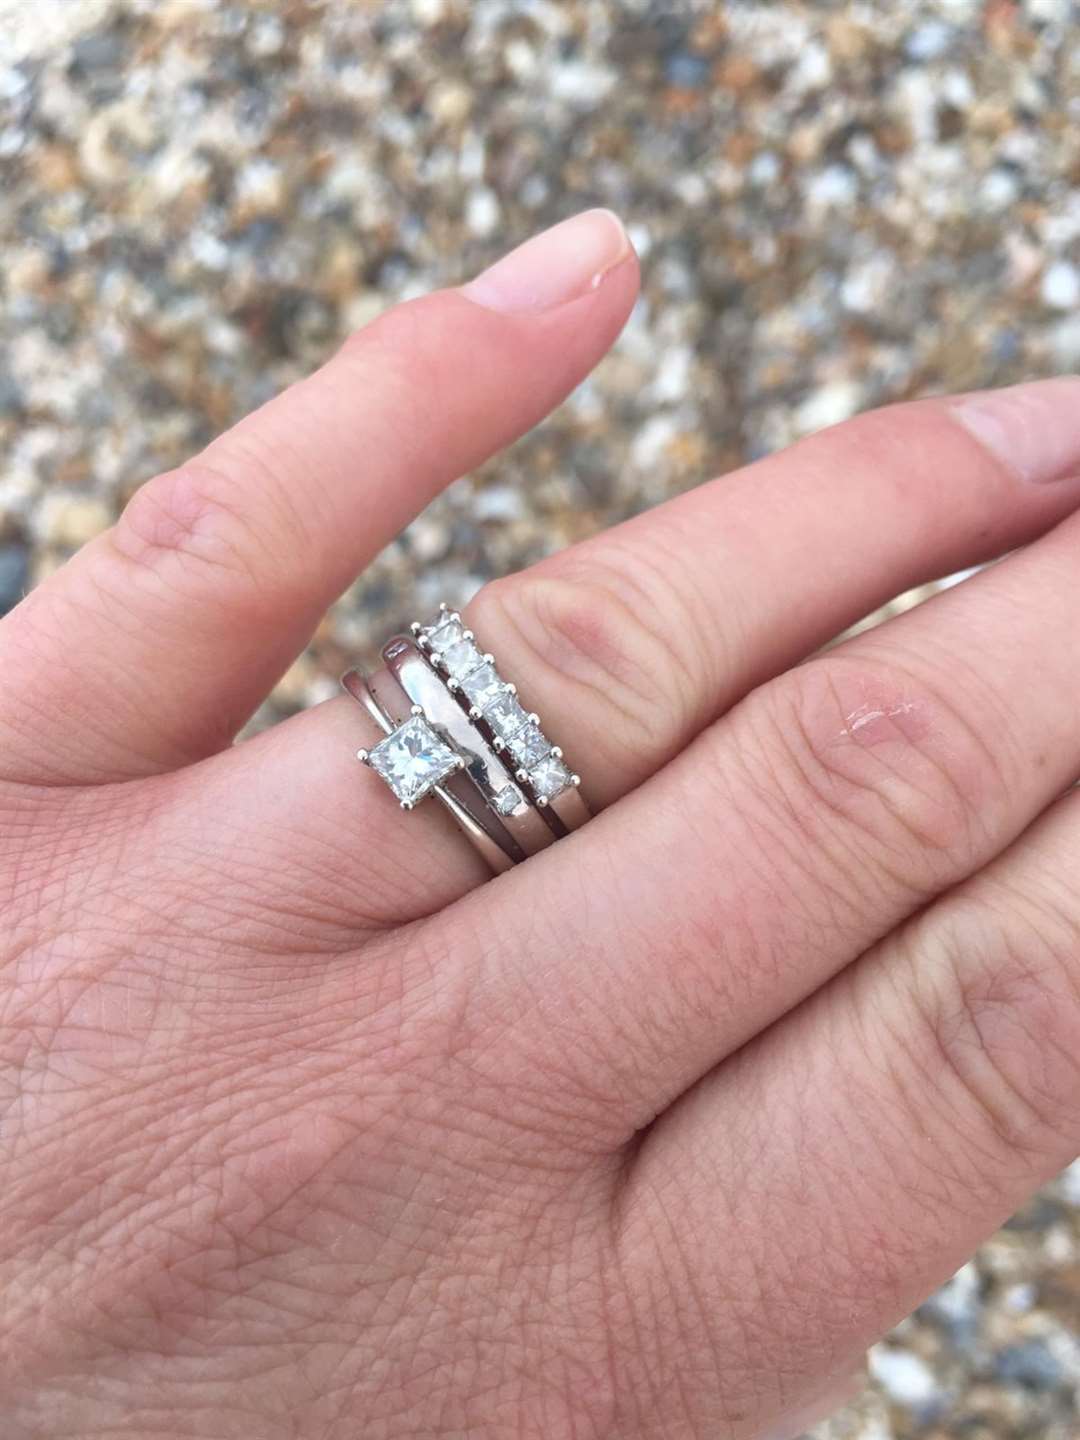 The three rings - a wedding, engagement and eternity ring - were recovered from Leysdown beach